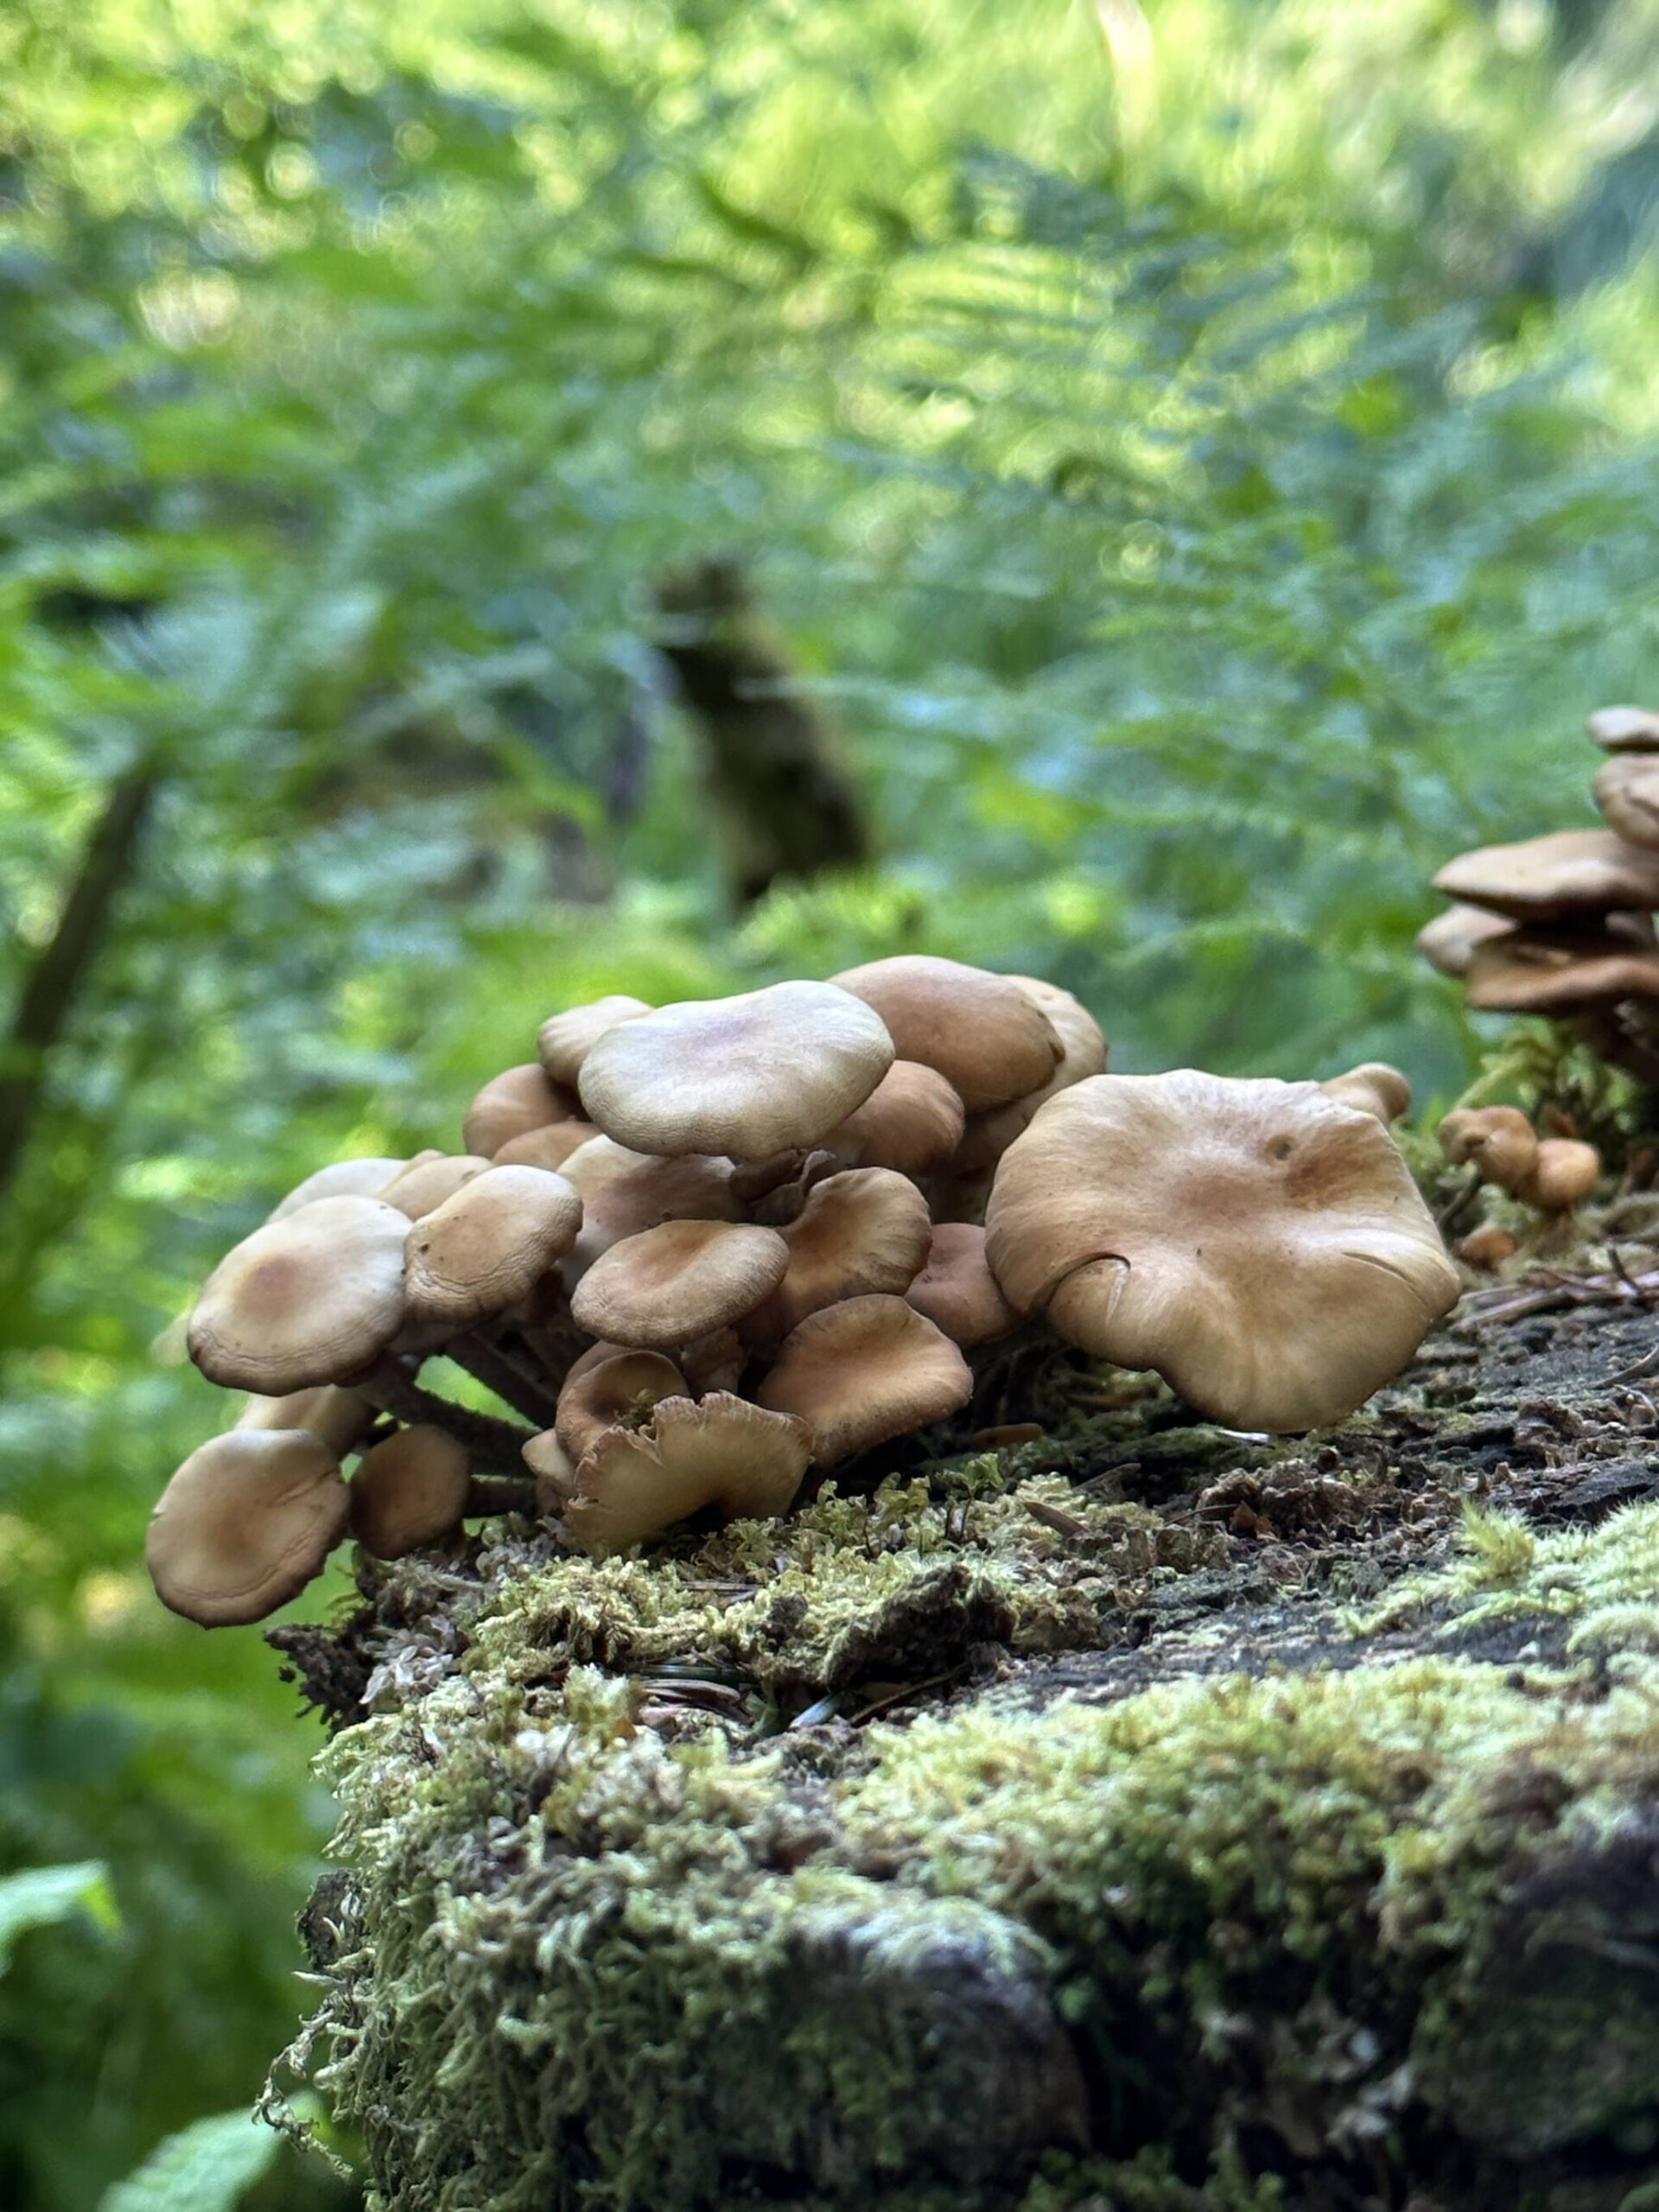 A stump covered in mushrooms along the Boy Scout Beach Trail on July 8. (Photo by Deana Barajas)